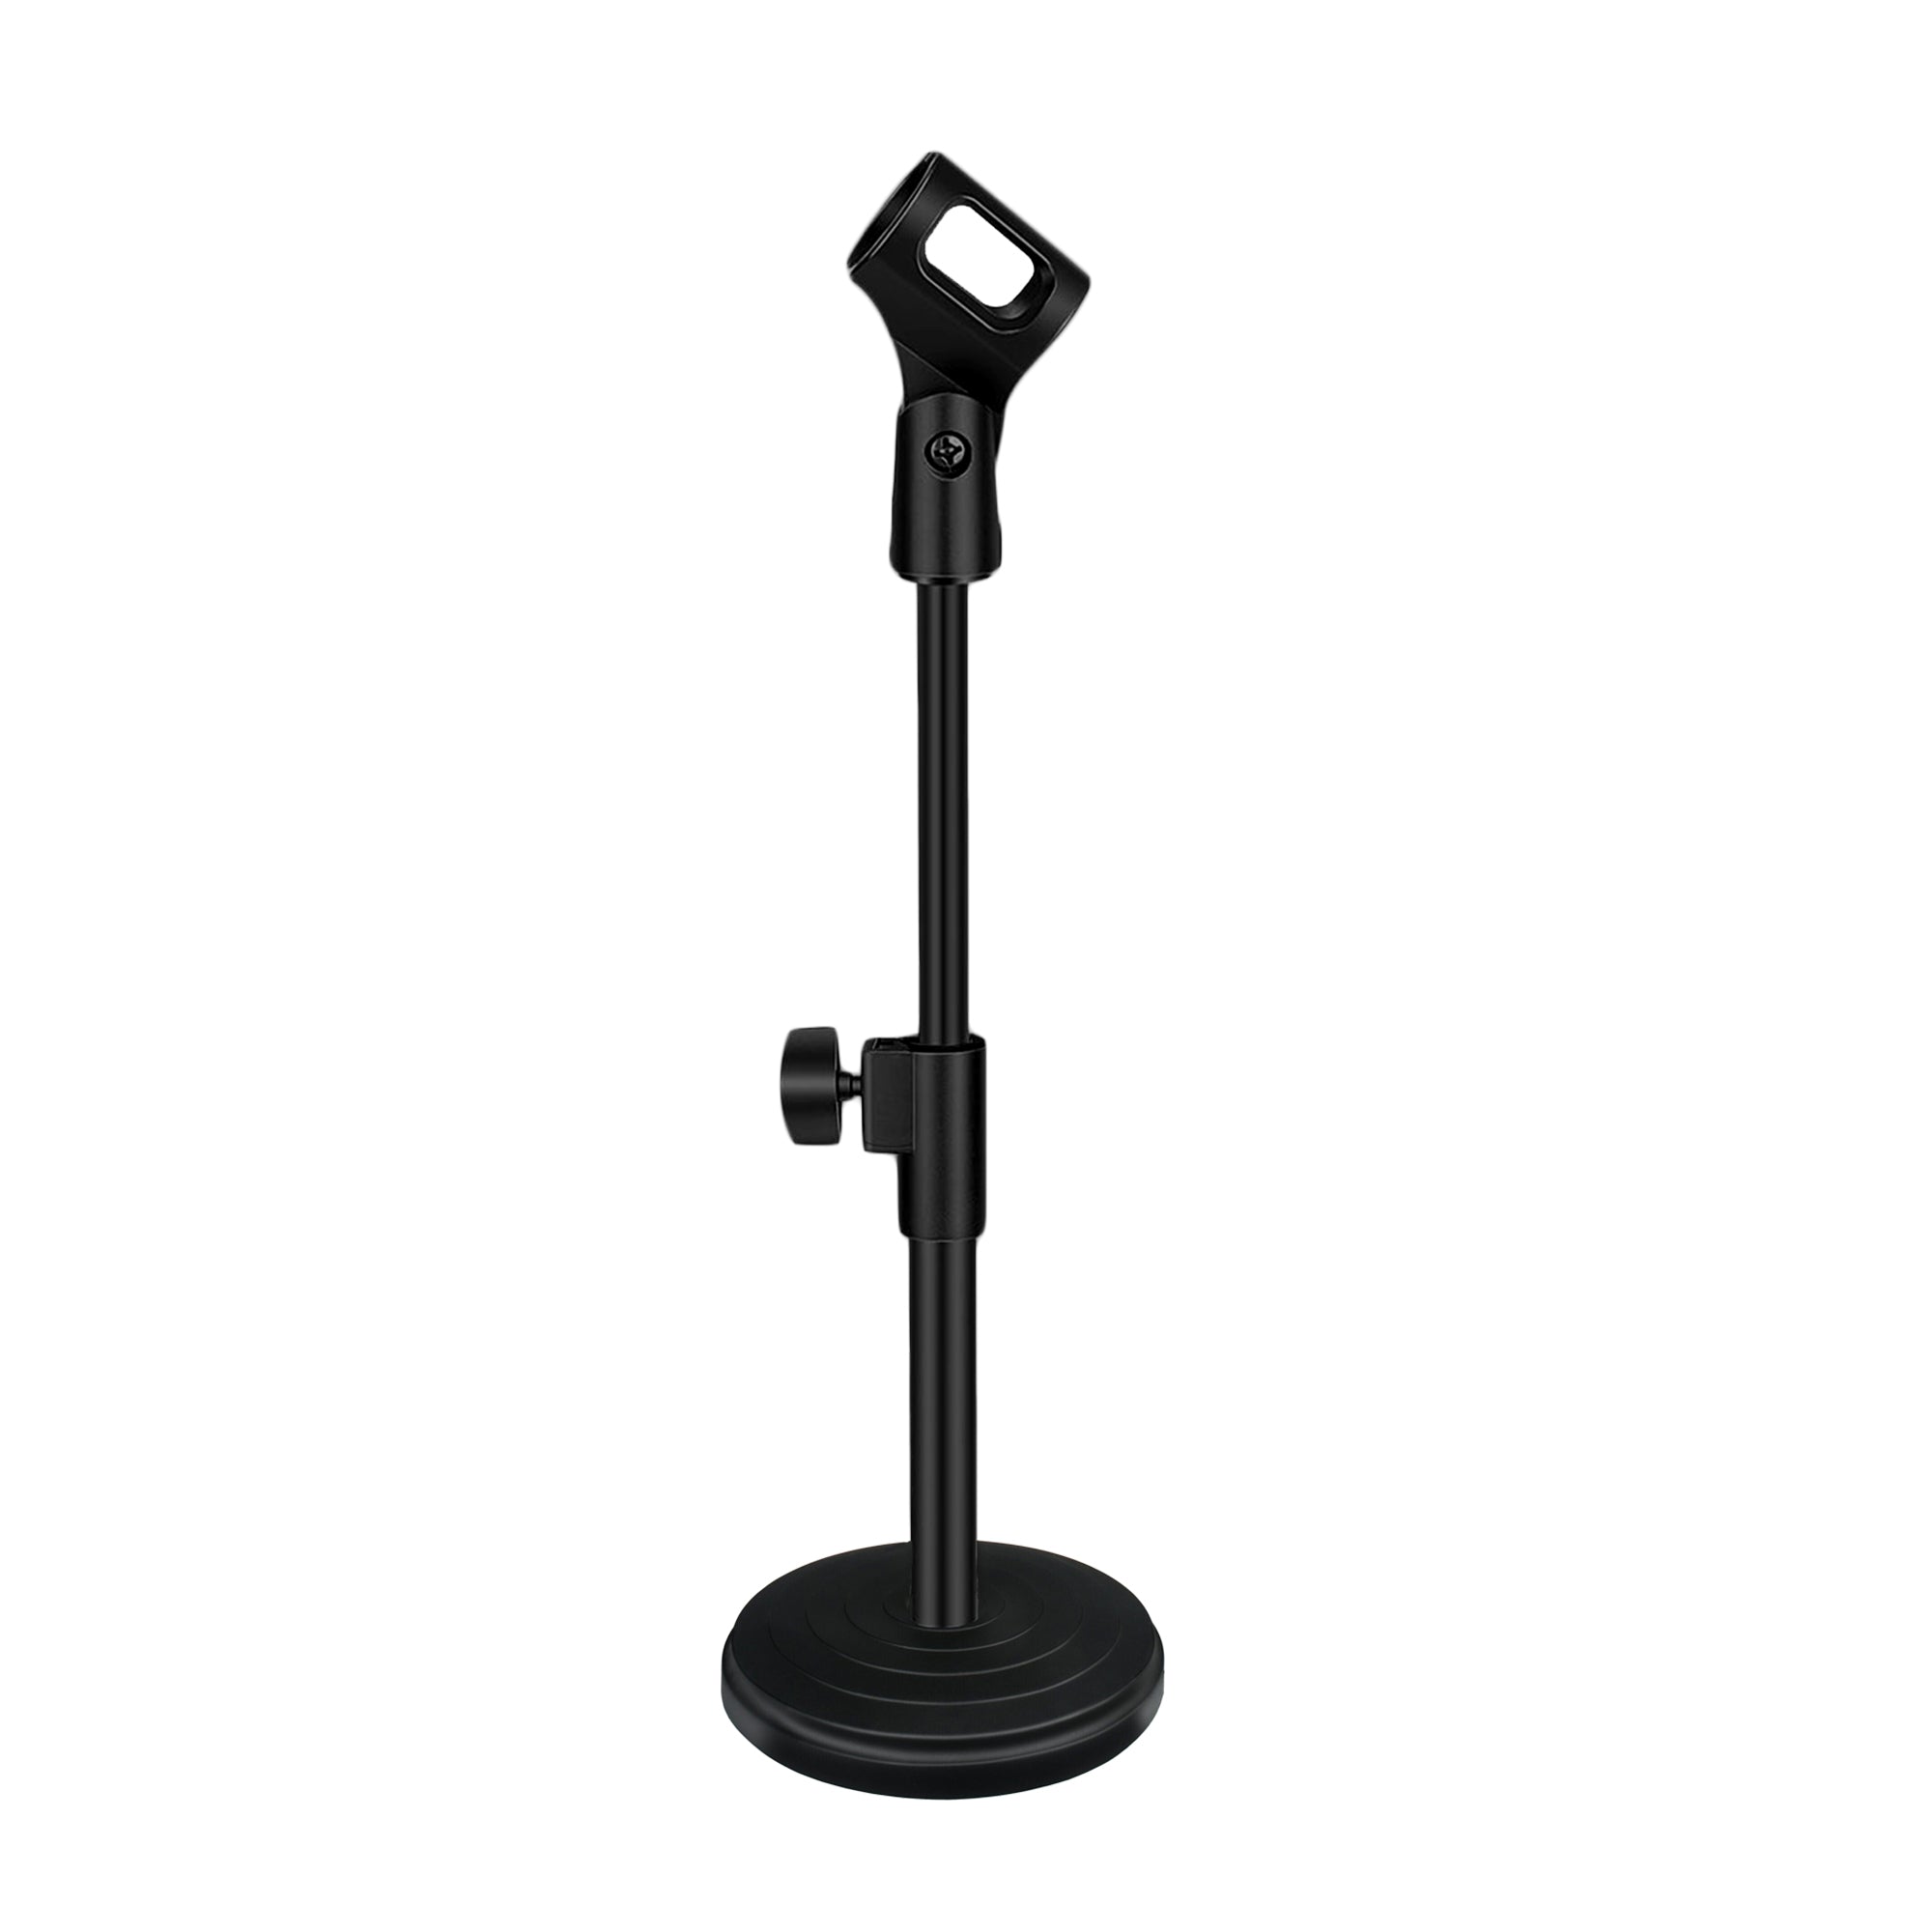 5 Core Universal Small Desktop Microphone Stand 1 Piece Black Adjustable Mic Clip Tabletop Mic Stand For Dynamic Wired and Pencil Microphone - DMS 03